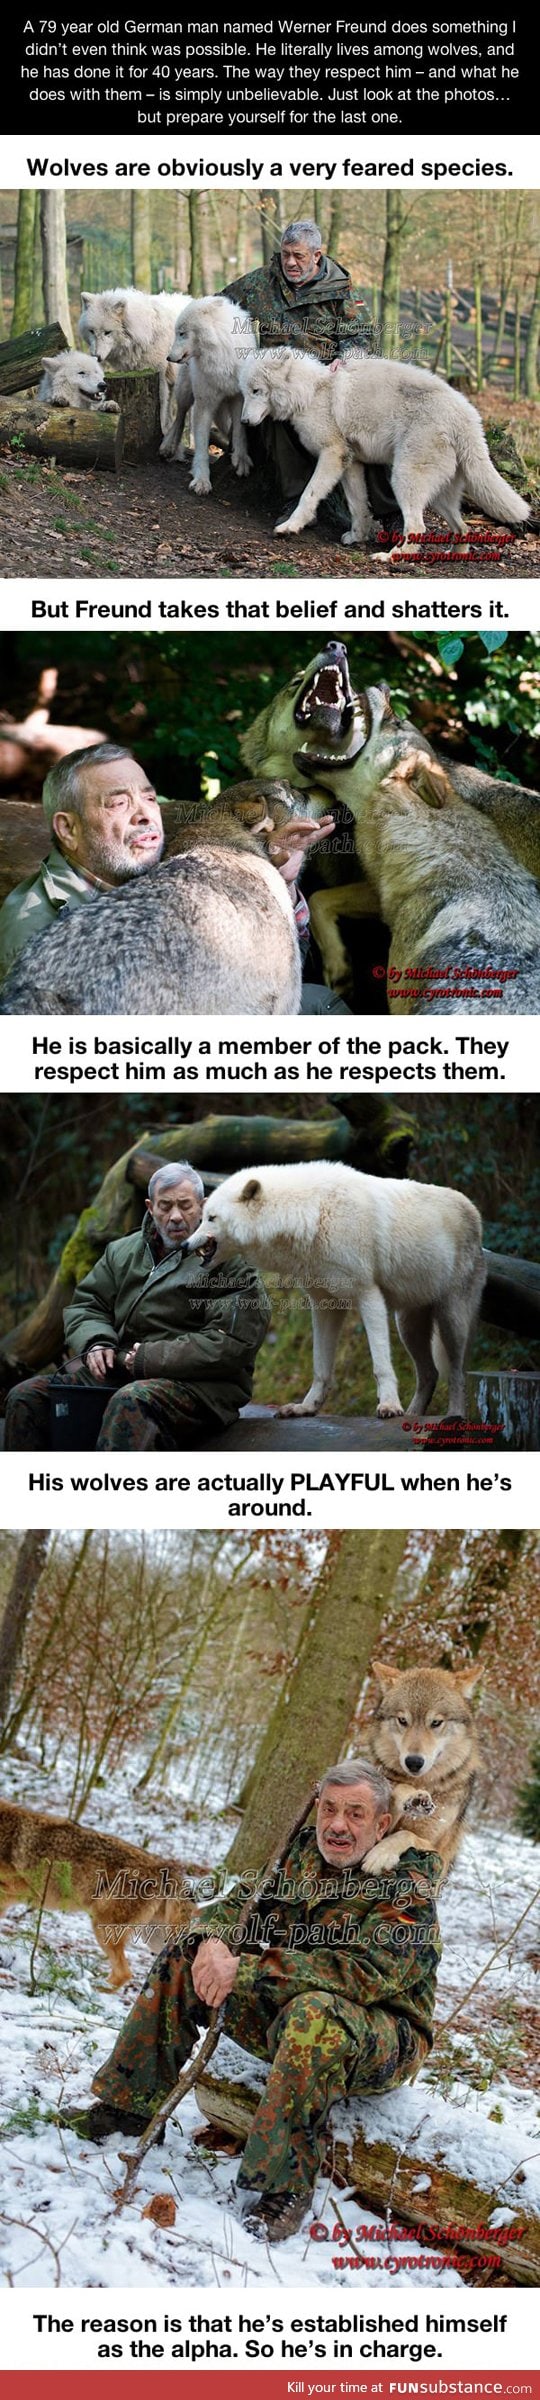 He's part of the wolfpack for real